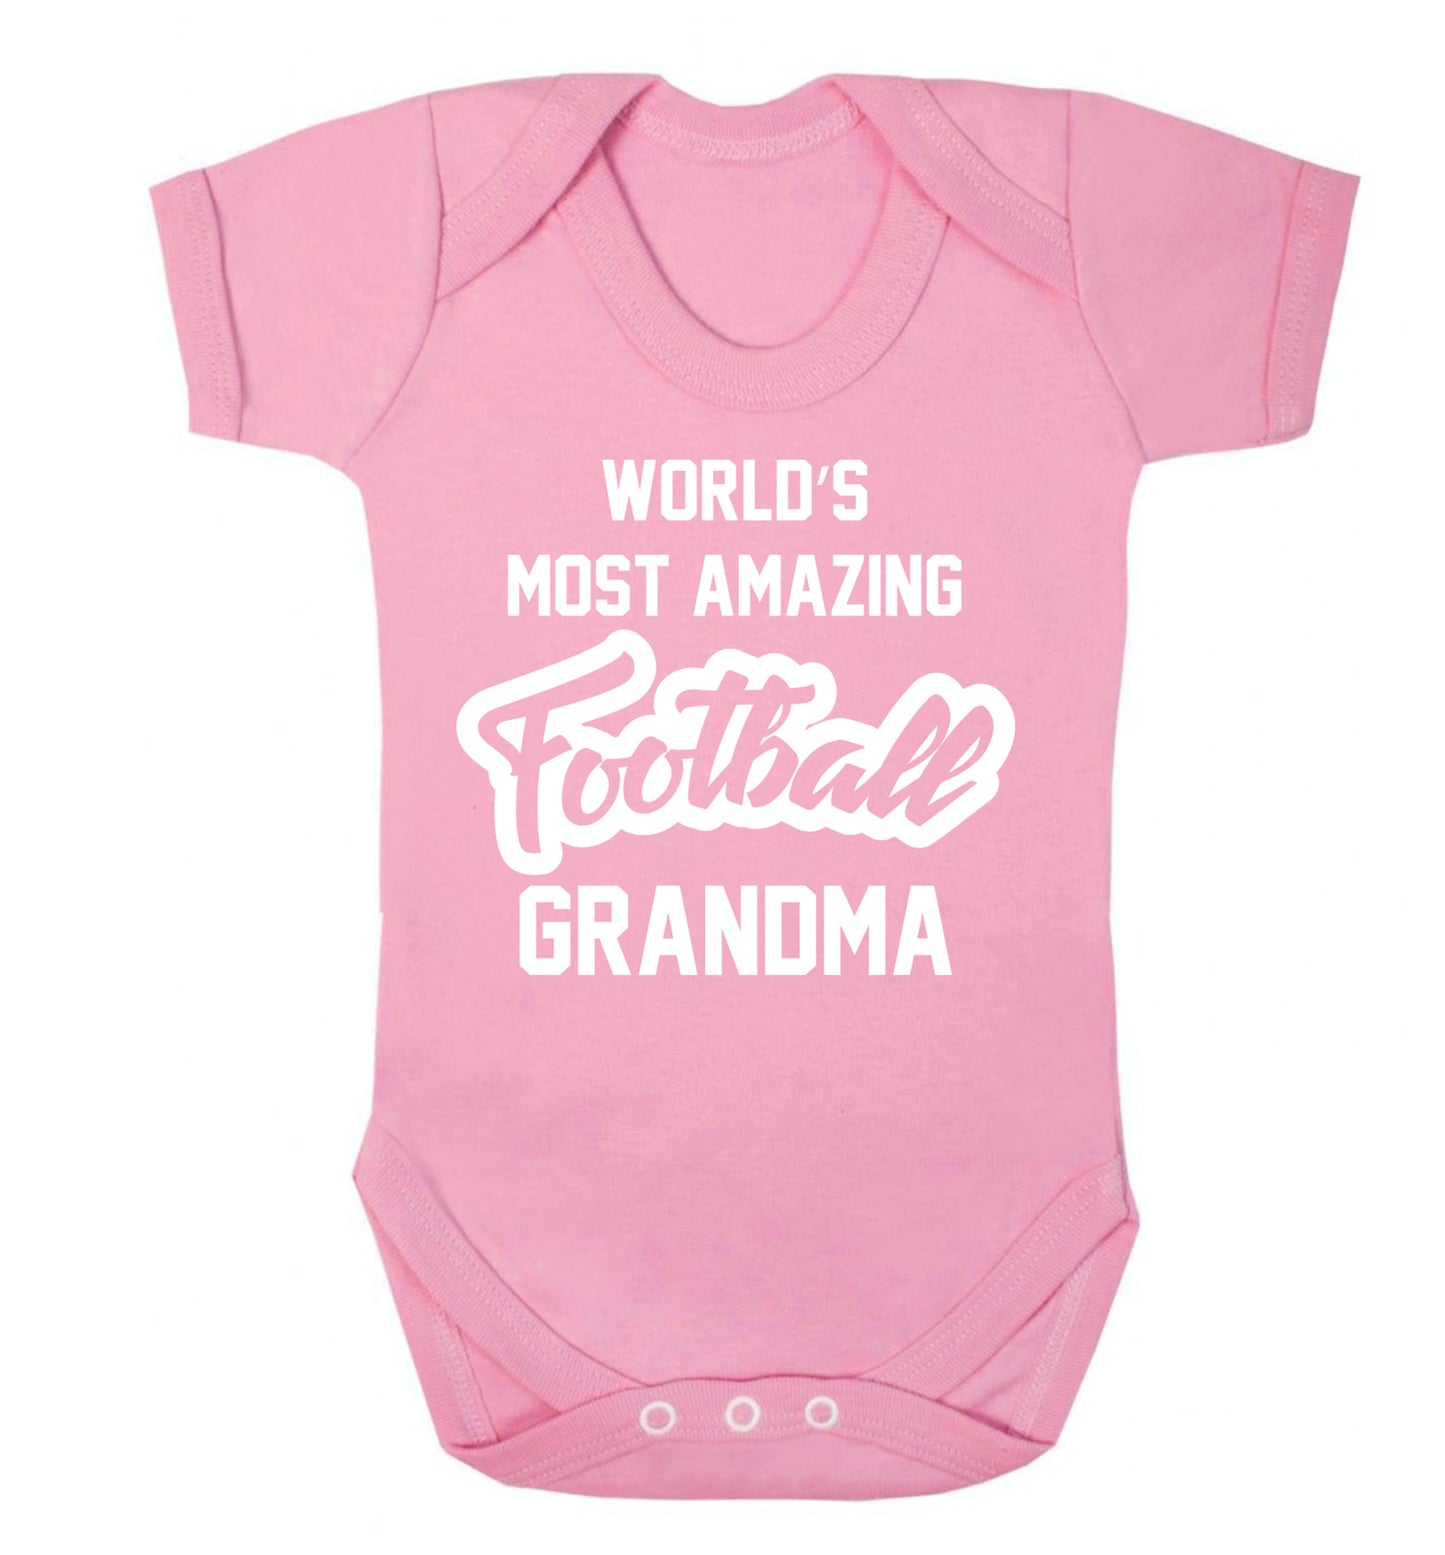 Worlds most amazing football grandma Baby Vest pale pink 18-24 months